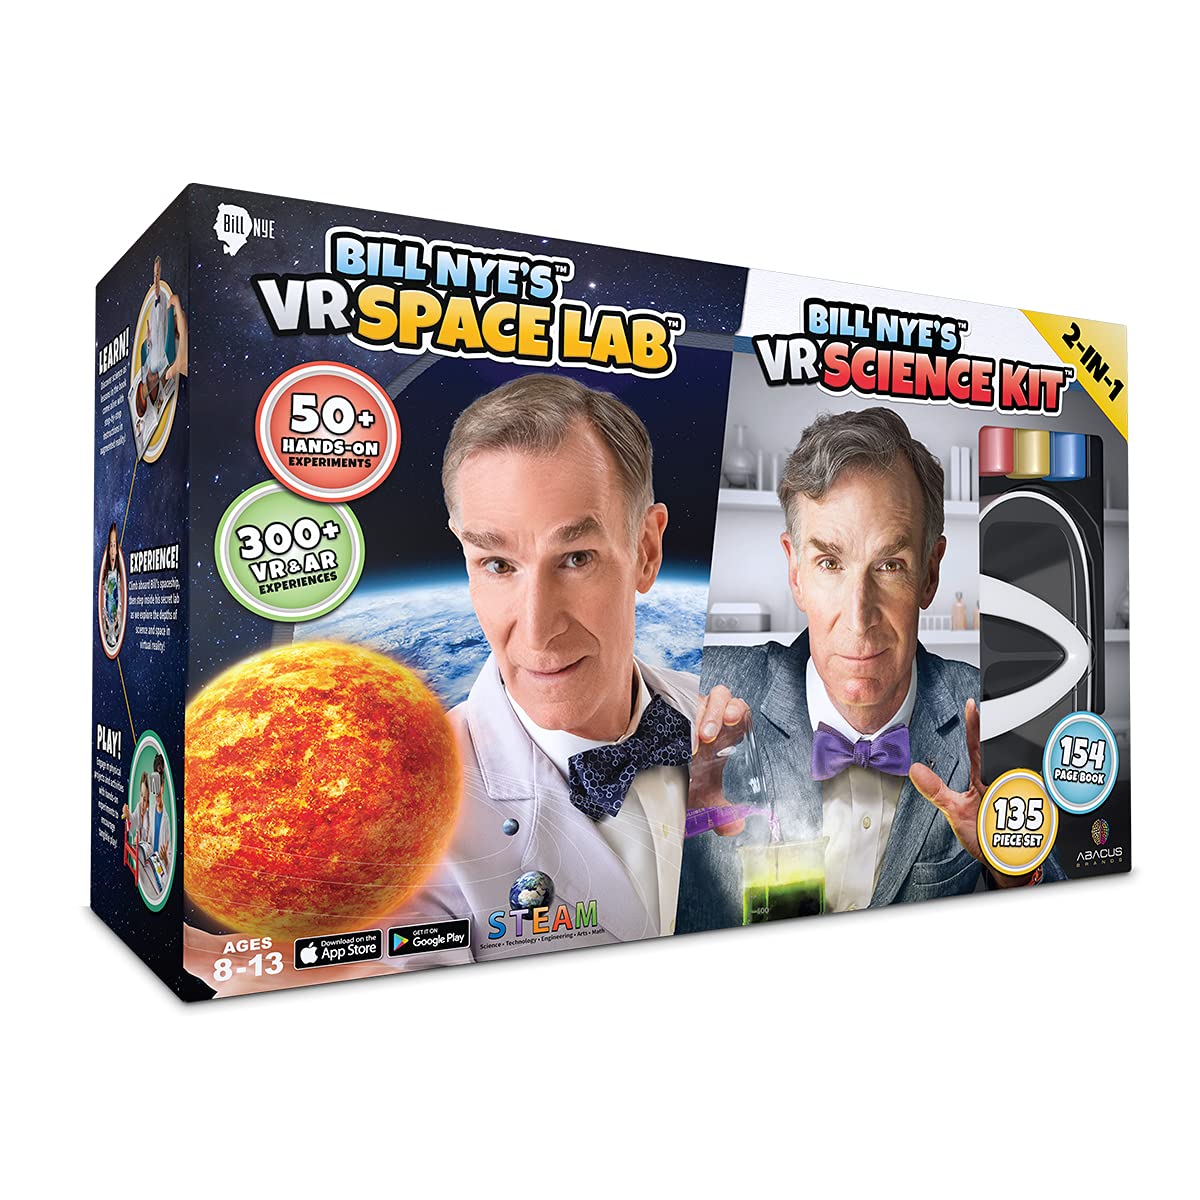 Abacus Brands Bill Nye's VR Science Kit and VR Space Lab - Virtual Reality Kids Science Kit, Book and Interactive STEM Learning Activity Set (2 in 1 Combo Pack)…